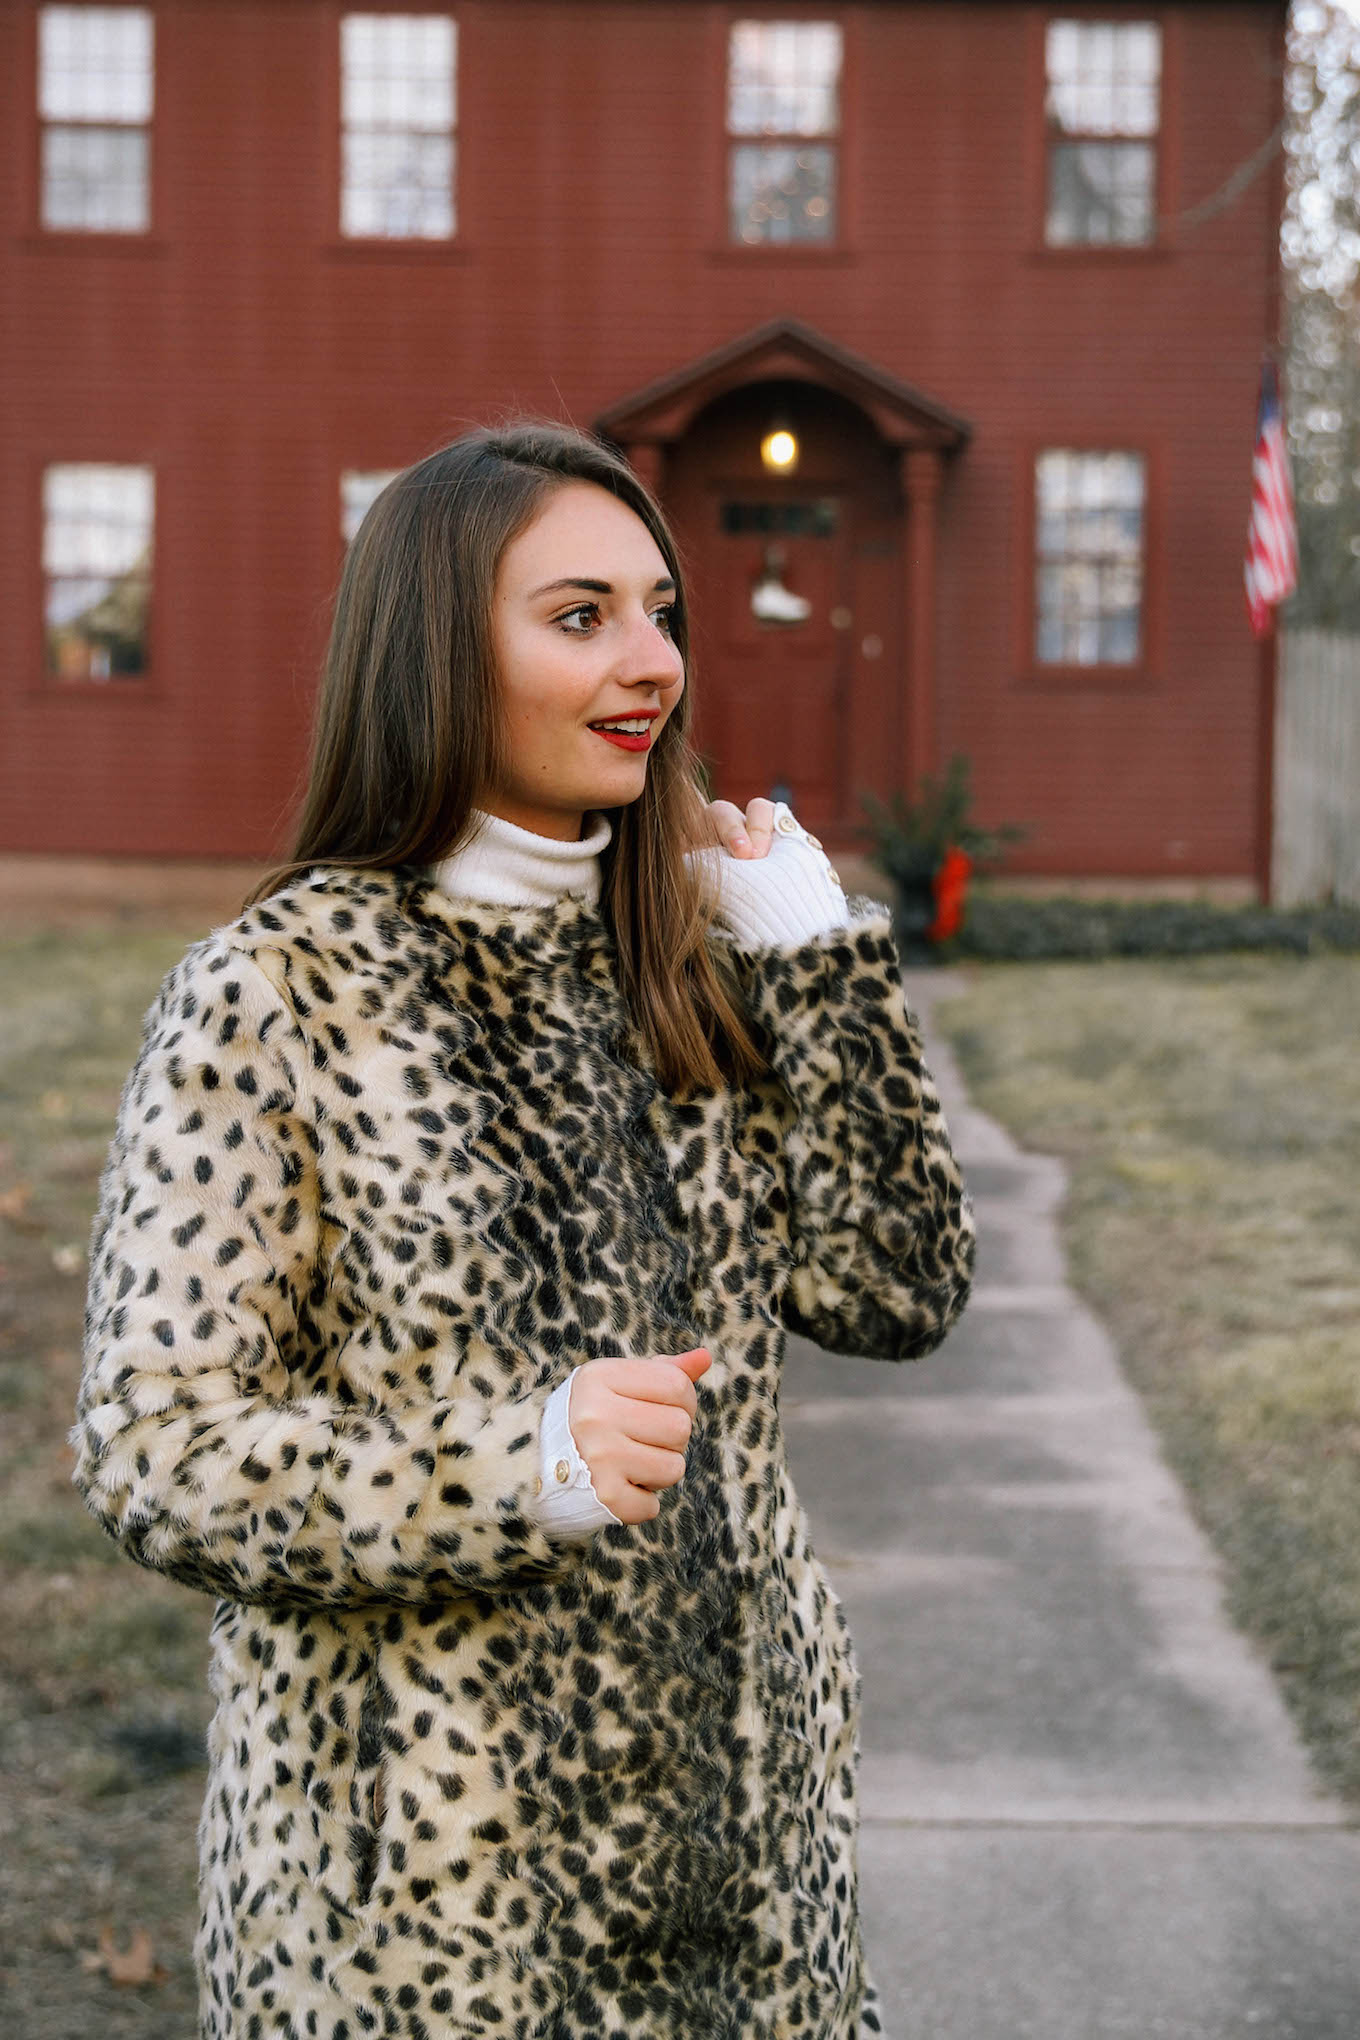 Frosted Window Panes and Leopard Coats | The Coastal Confidence by Aubrey Yandow